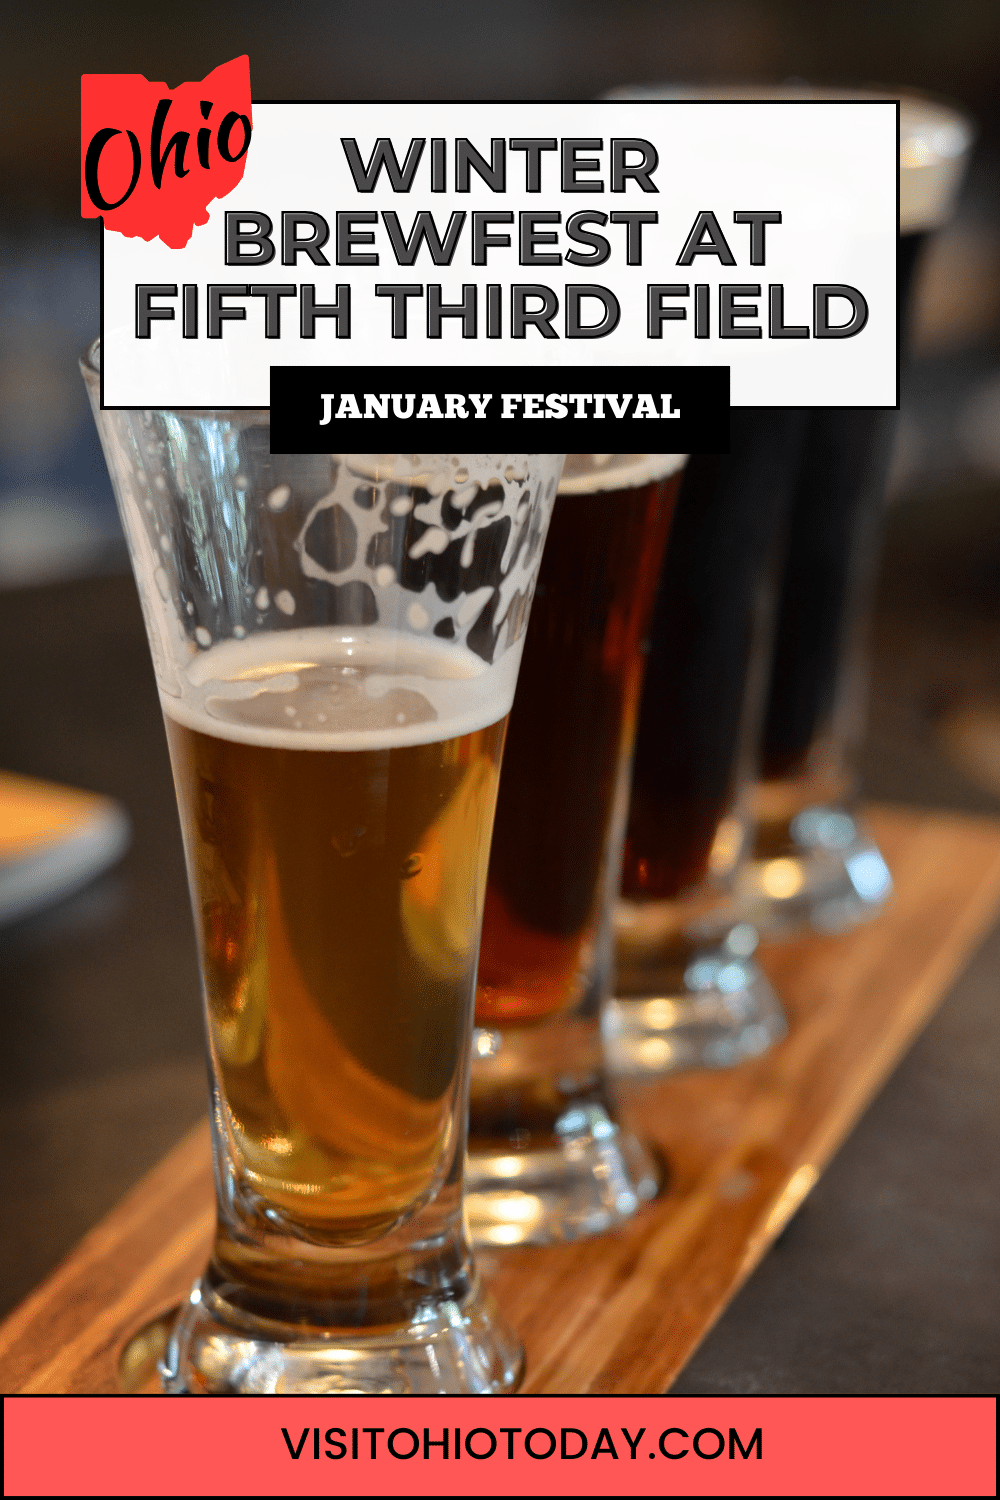 This Brewfest is held in Toledo on Saturday 20th January, 2024, from 5 pm to 9 pm. Beer enthusiasts can enjoy the fun at this unique venue.